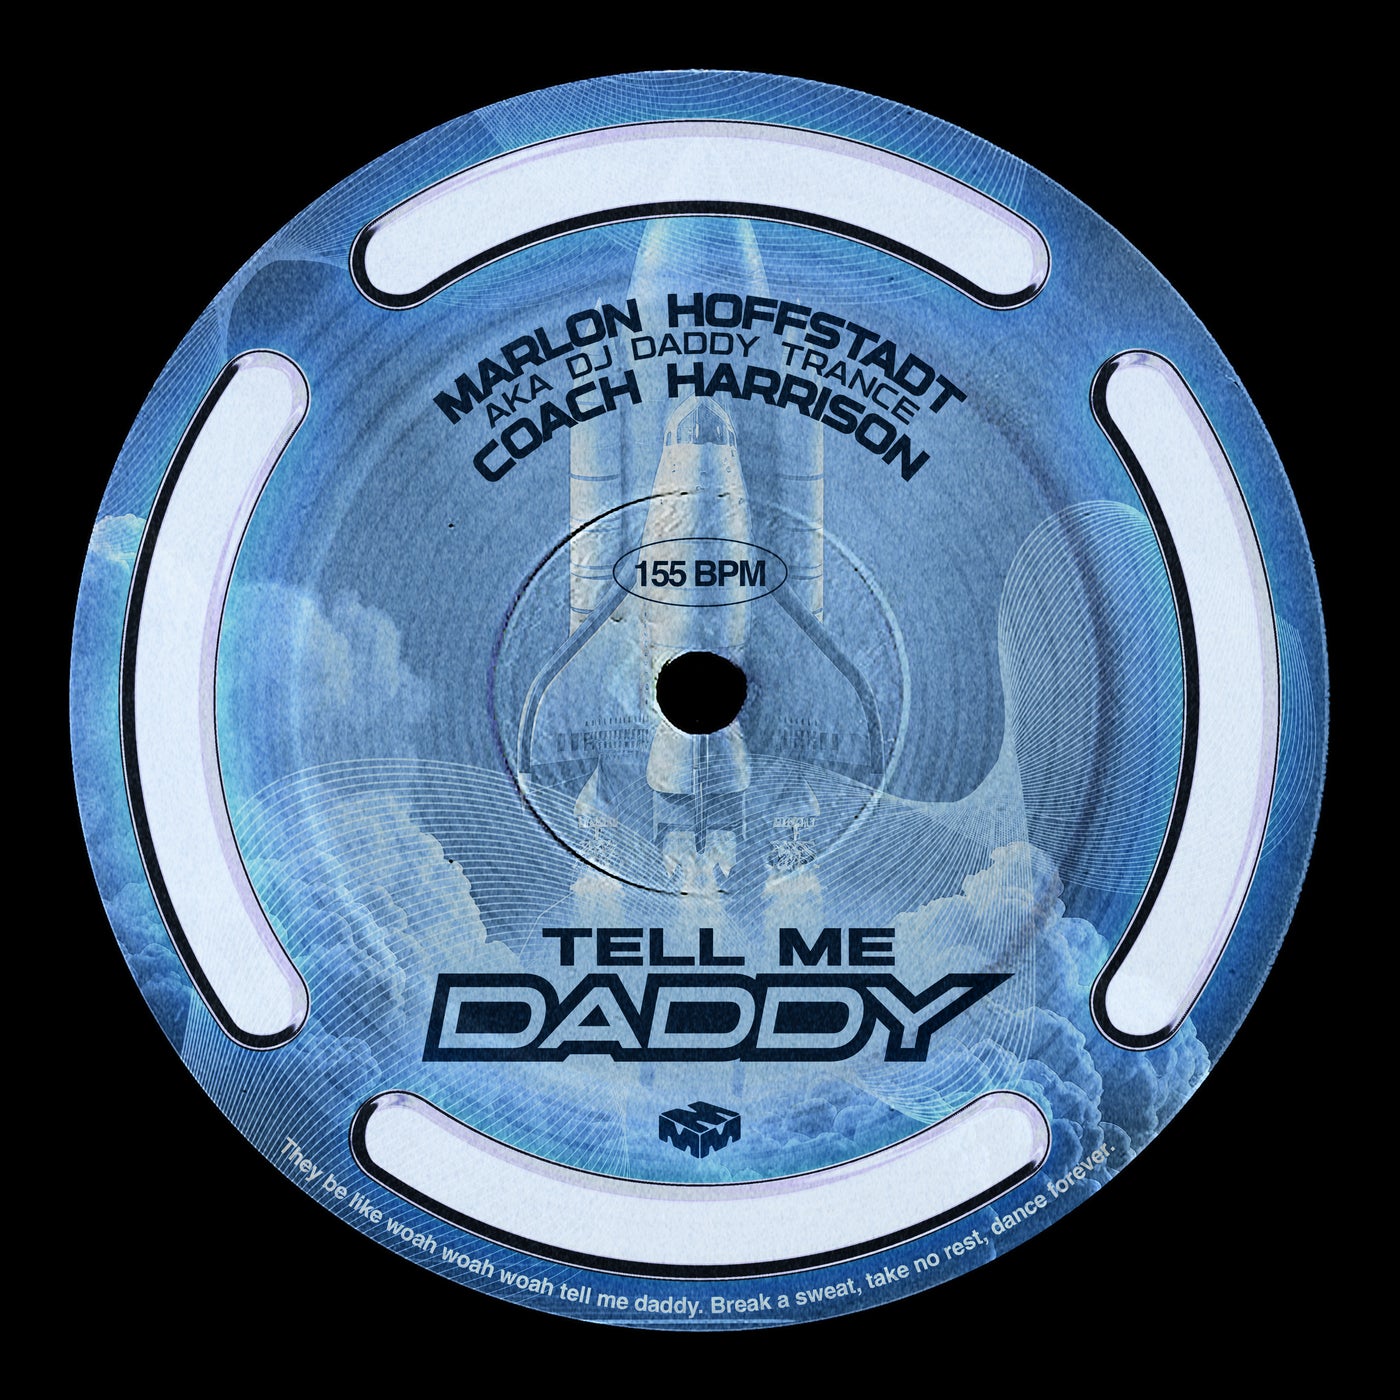 image cover: Marlon Hoffstadt, DJ Daddy Trance, Coach Harrison - Tell Me Daddy (Extended Mix) on Method 808